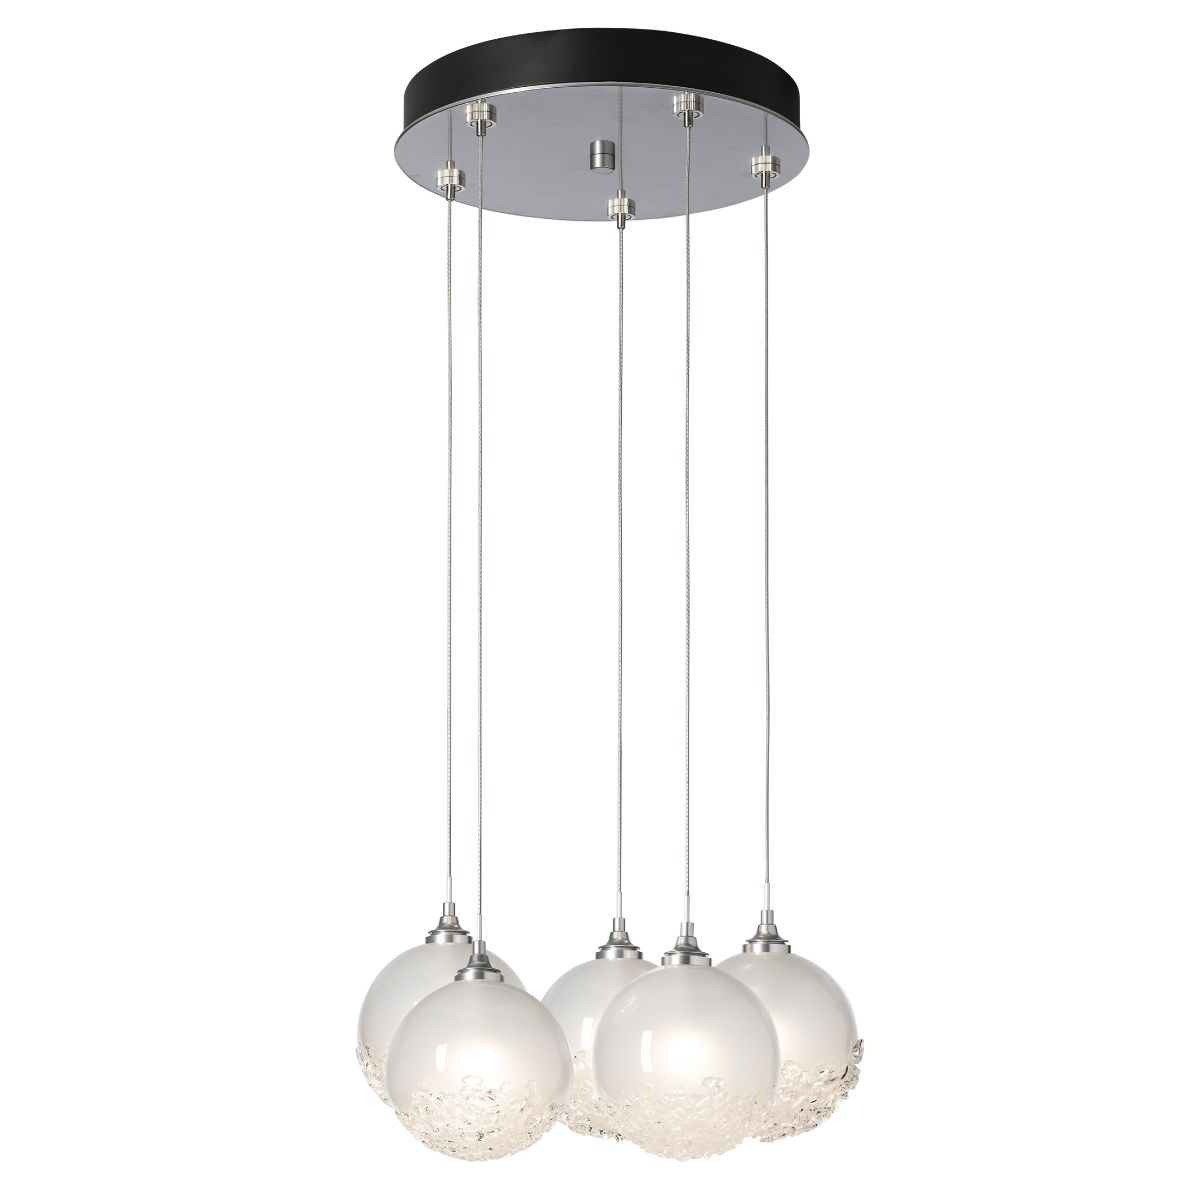 Fritz 5 lights Pendant Light with Long Height - Bees Lighting